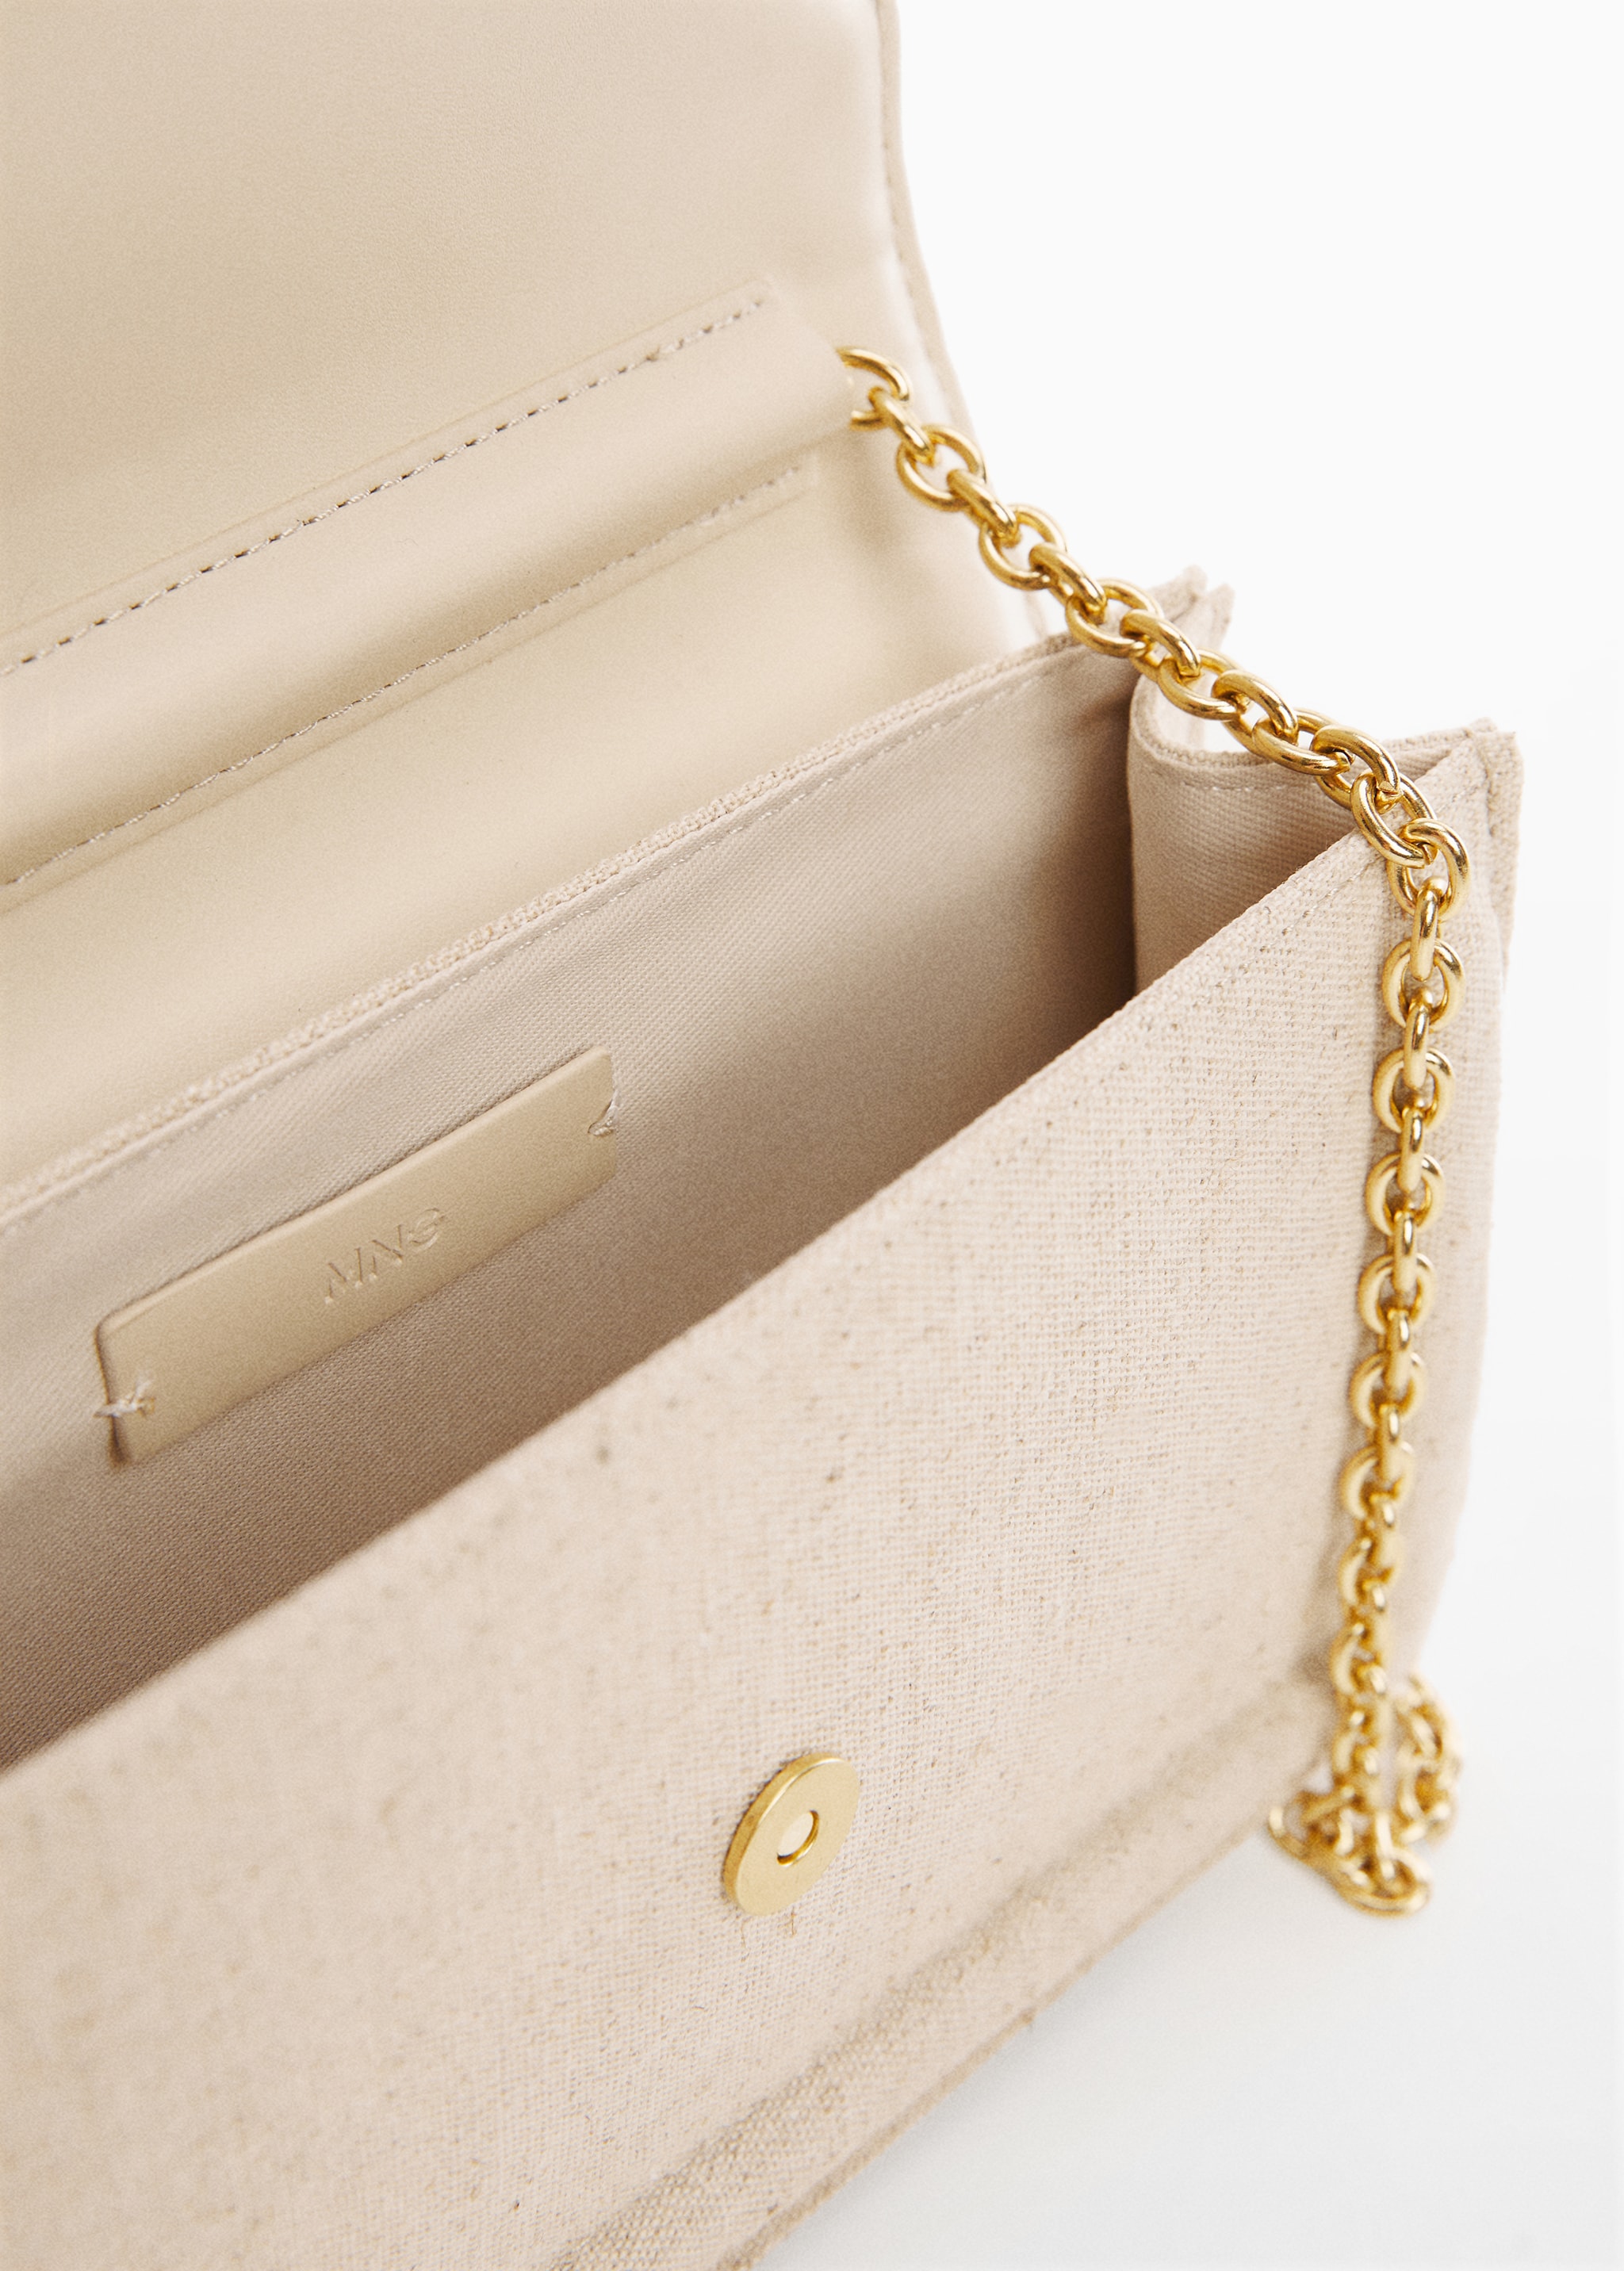 Textured bag with flap - Details of the article 2